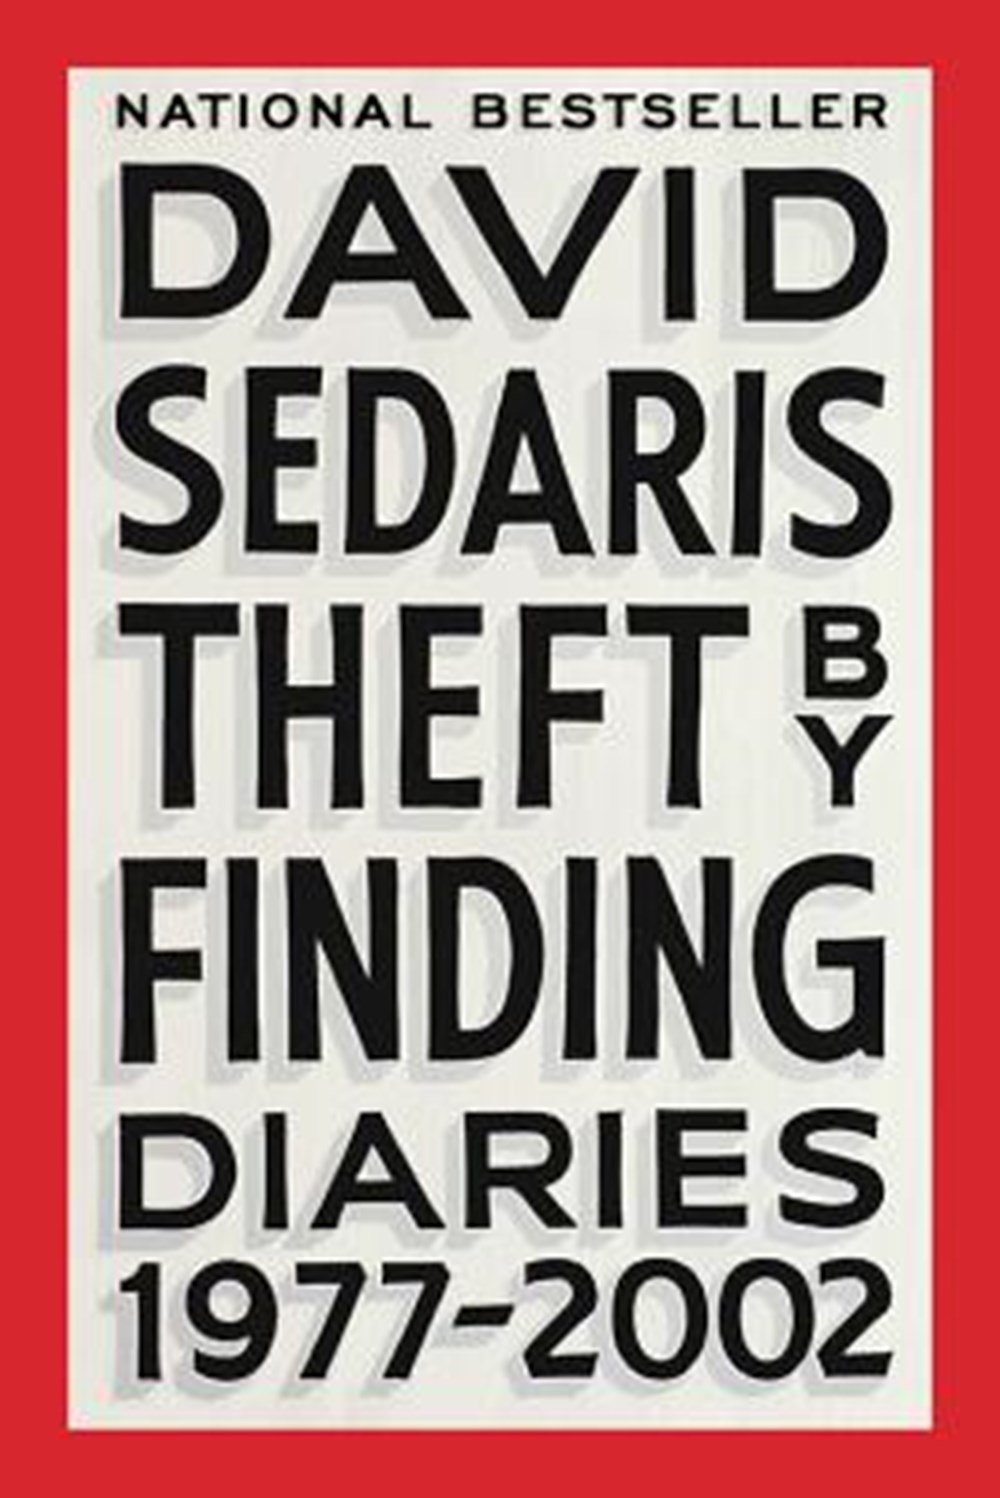 Theft by Finding Diaries (1977-2002)